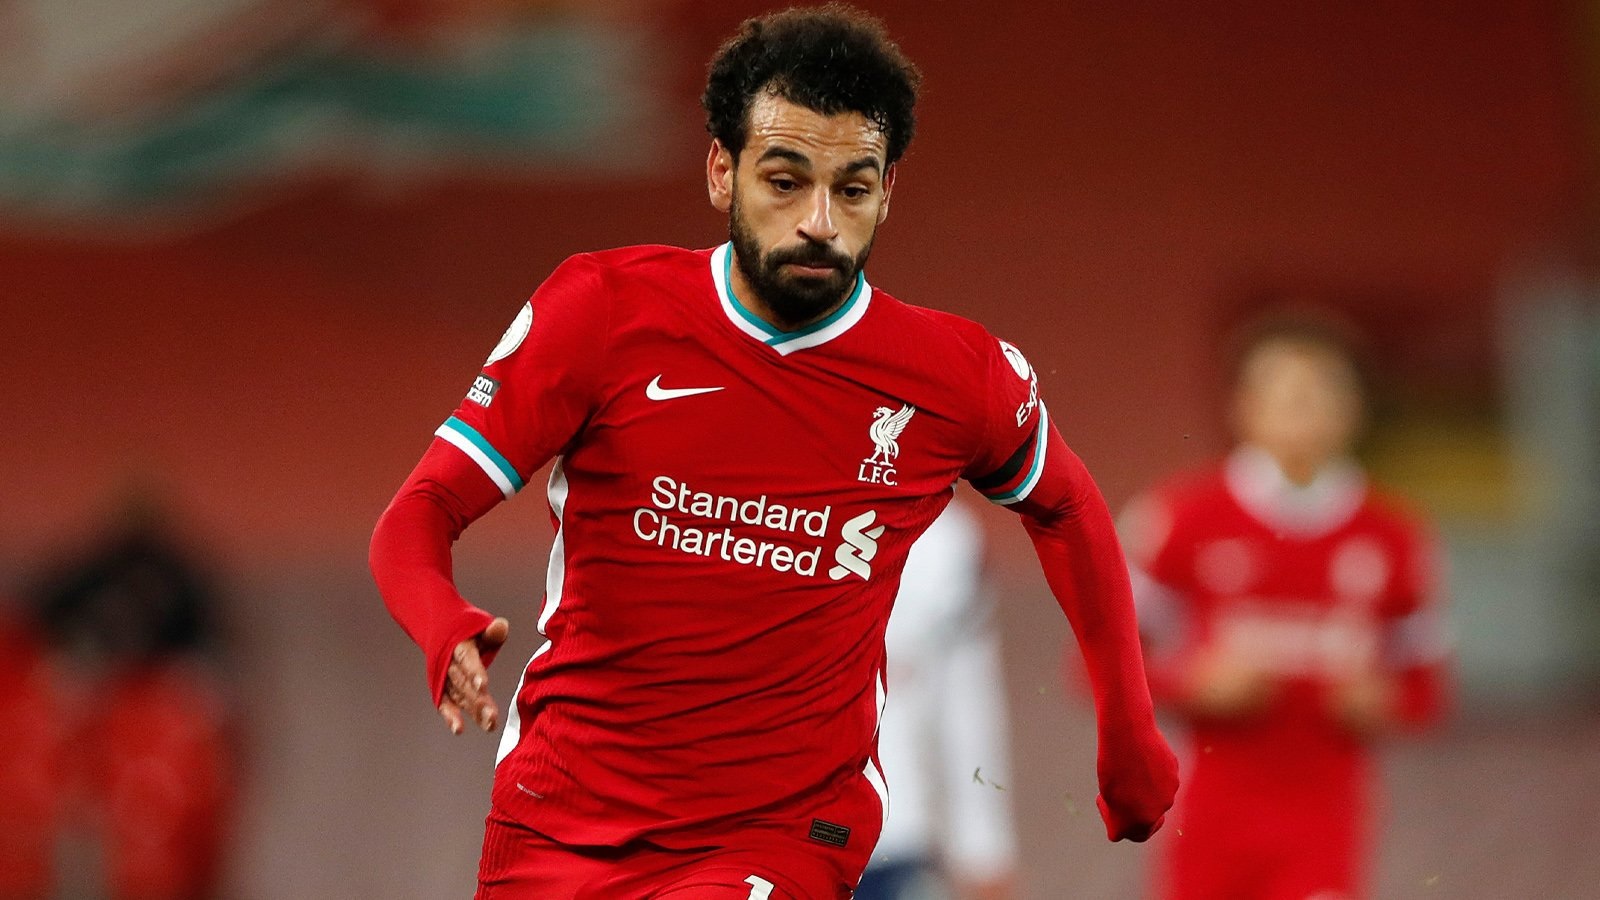 ‘It is easy to see where we would be without Mo’s goals’ – Klopp comes to Salah’s defence over single-mindedness in front of goal